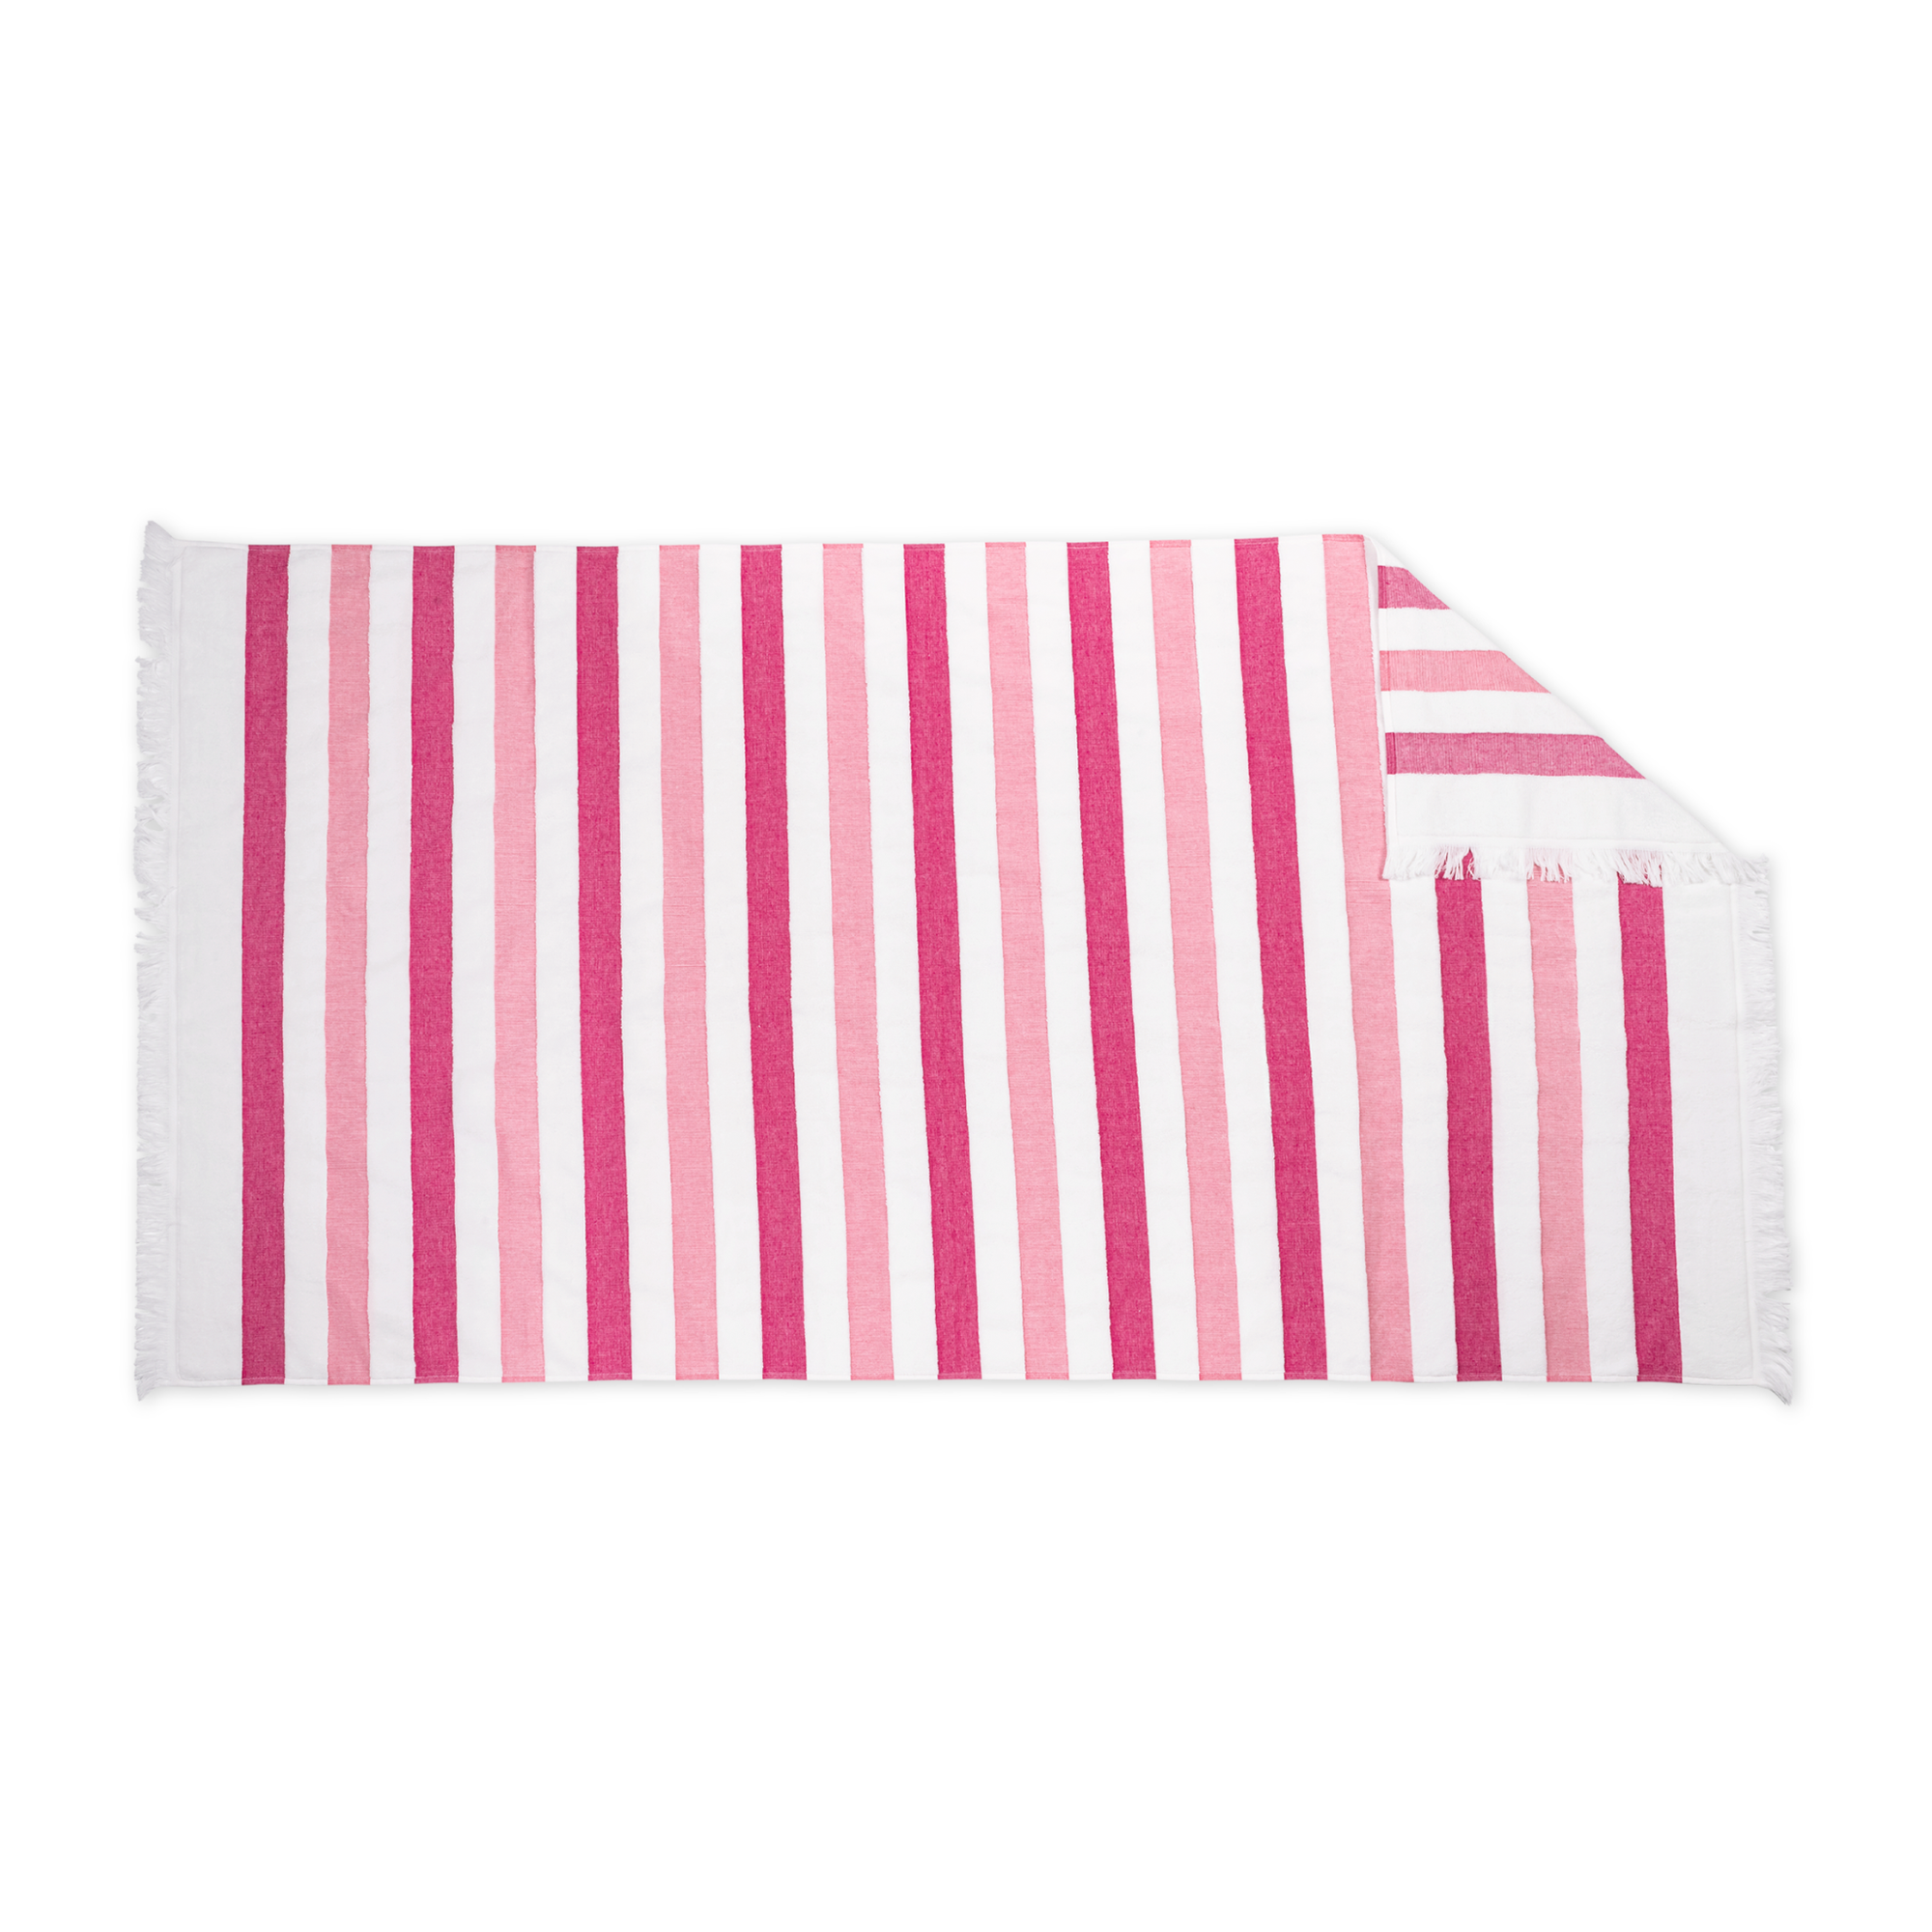 Matouk Amado Pool and Beach Towels in Candy Stripe Color